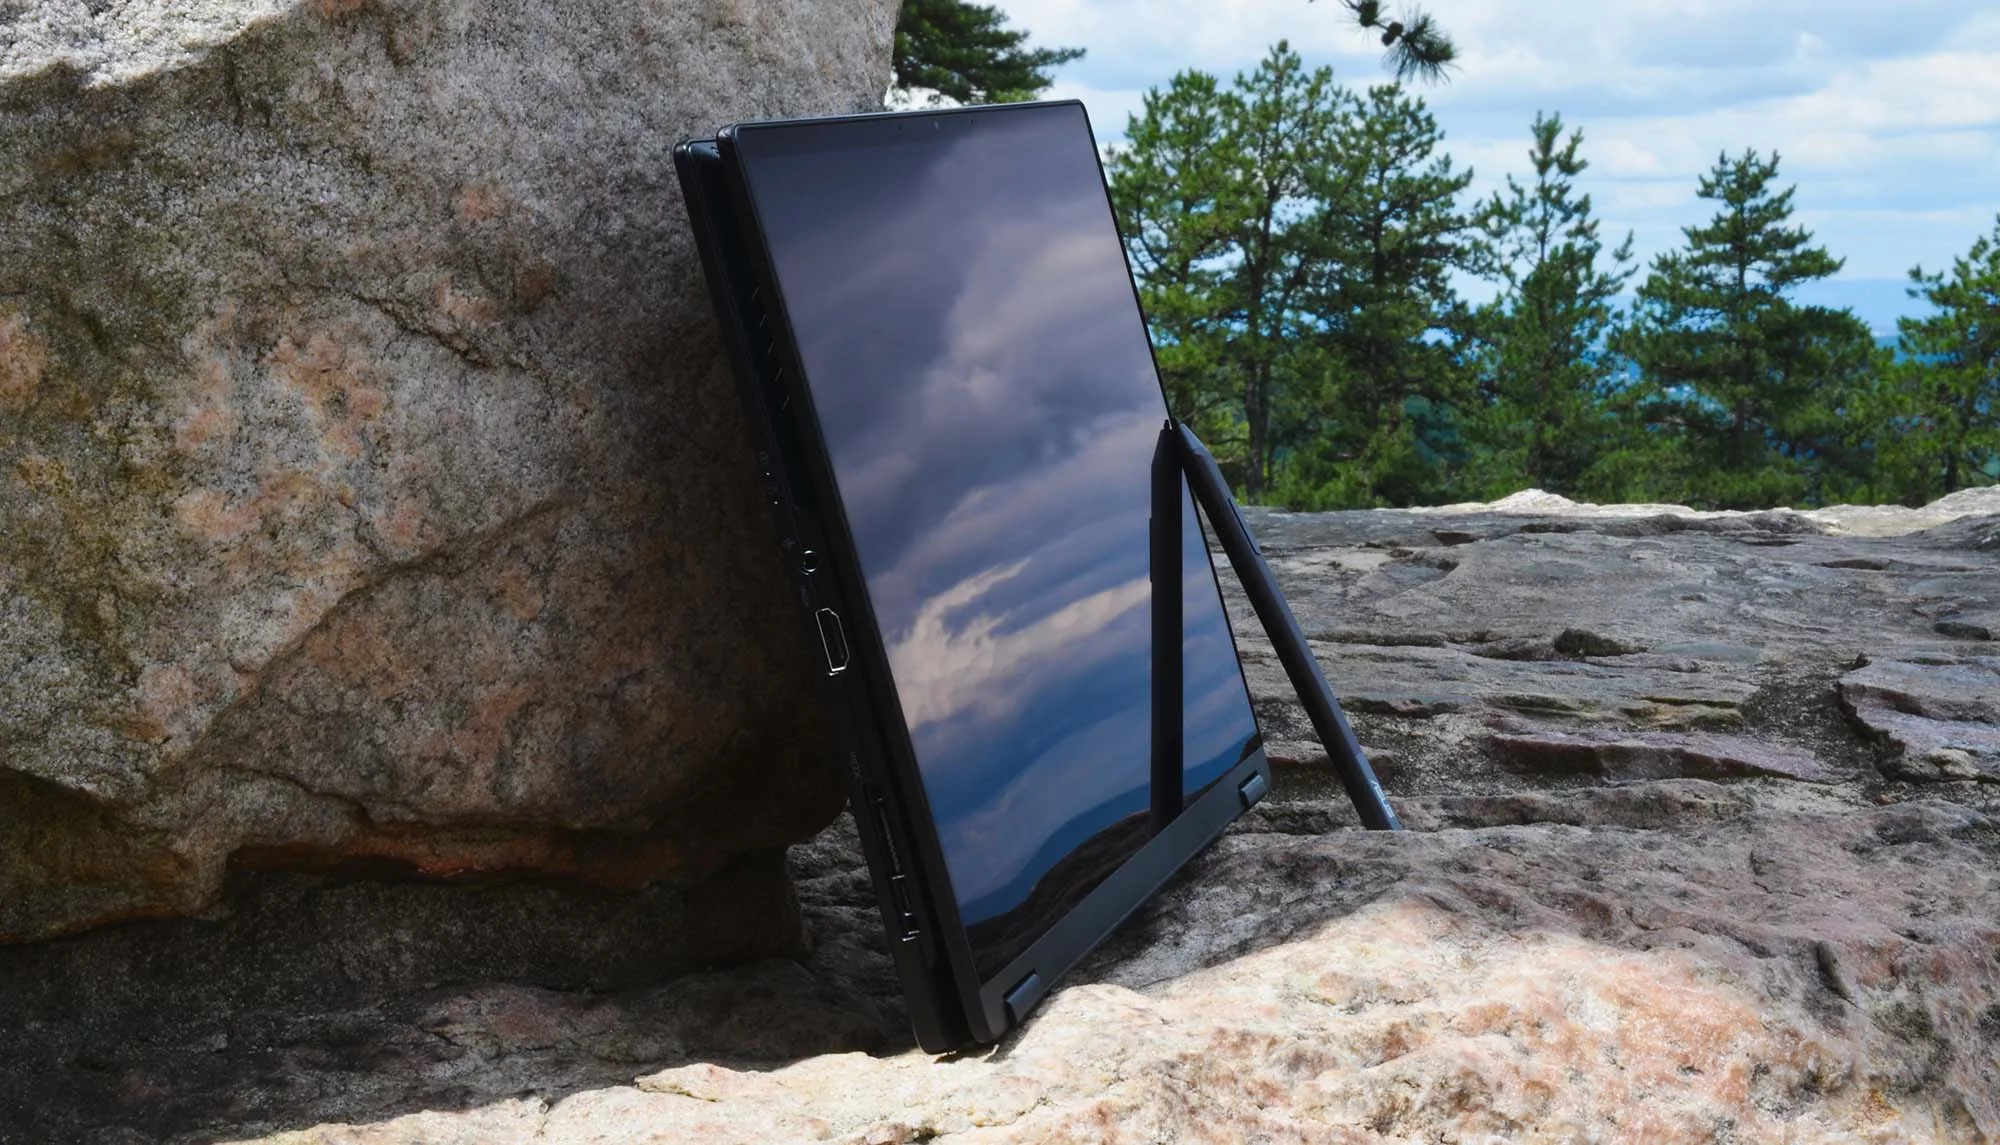 X13 in tablet mode with a stylus, leaning against a boulder with trees in the background.